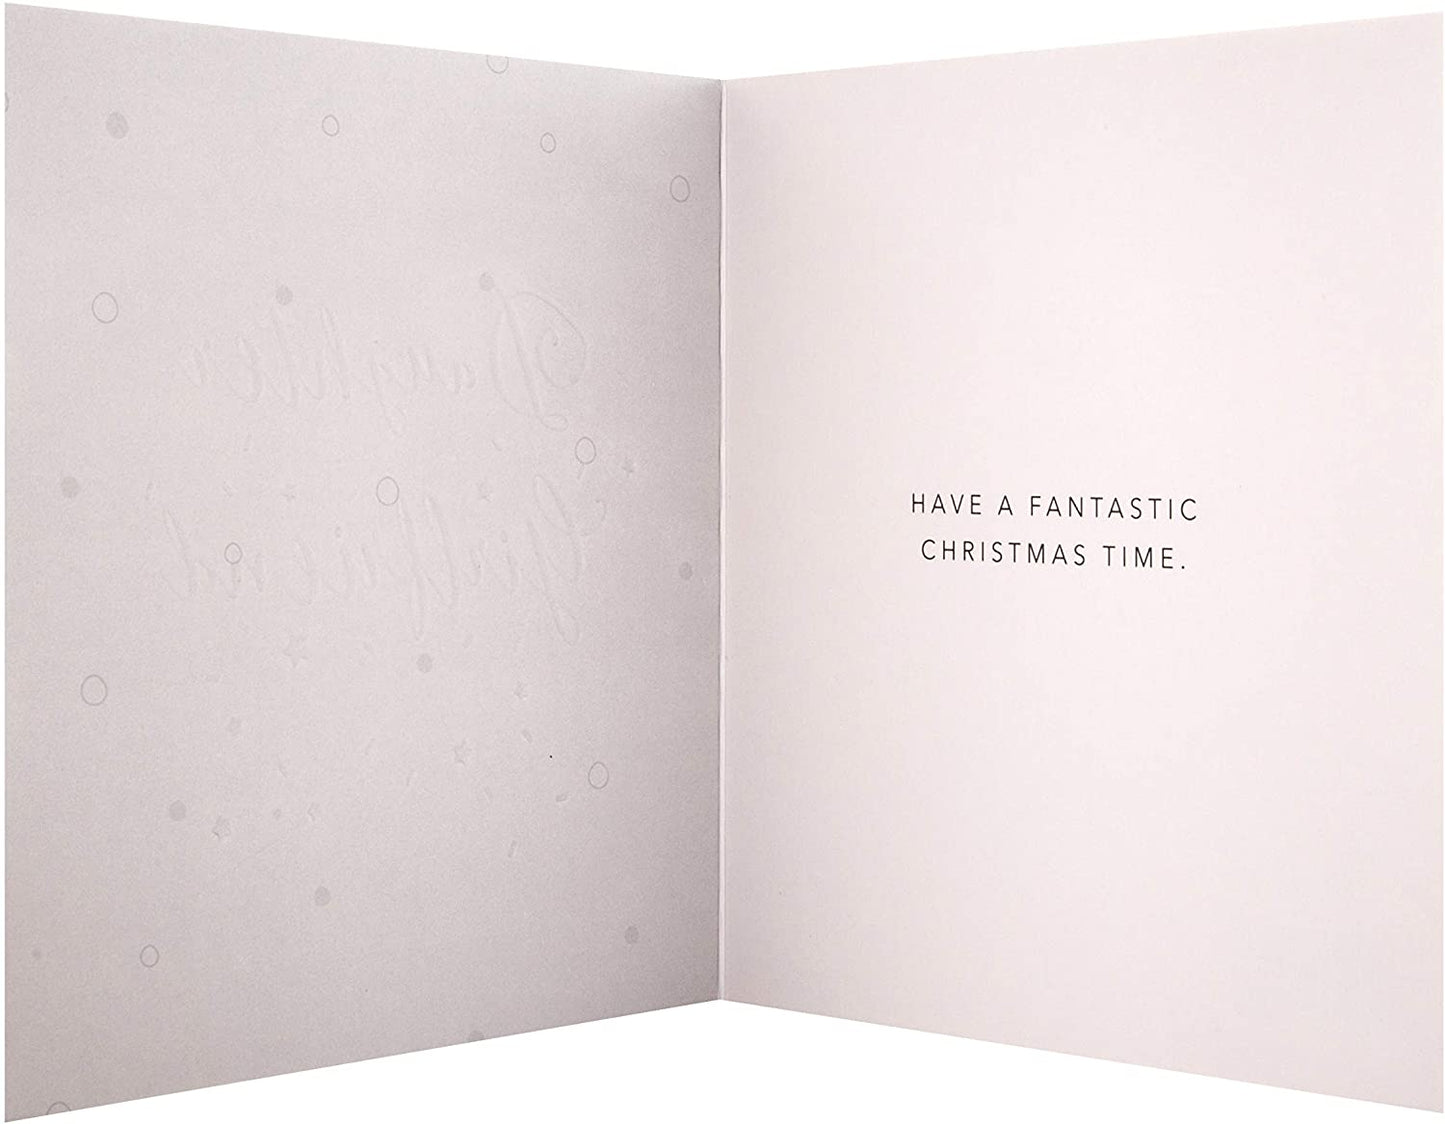 For A Special Daughter and Your Girlfriend Sugar Ombre Star Design Christmas Card